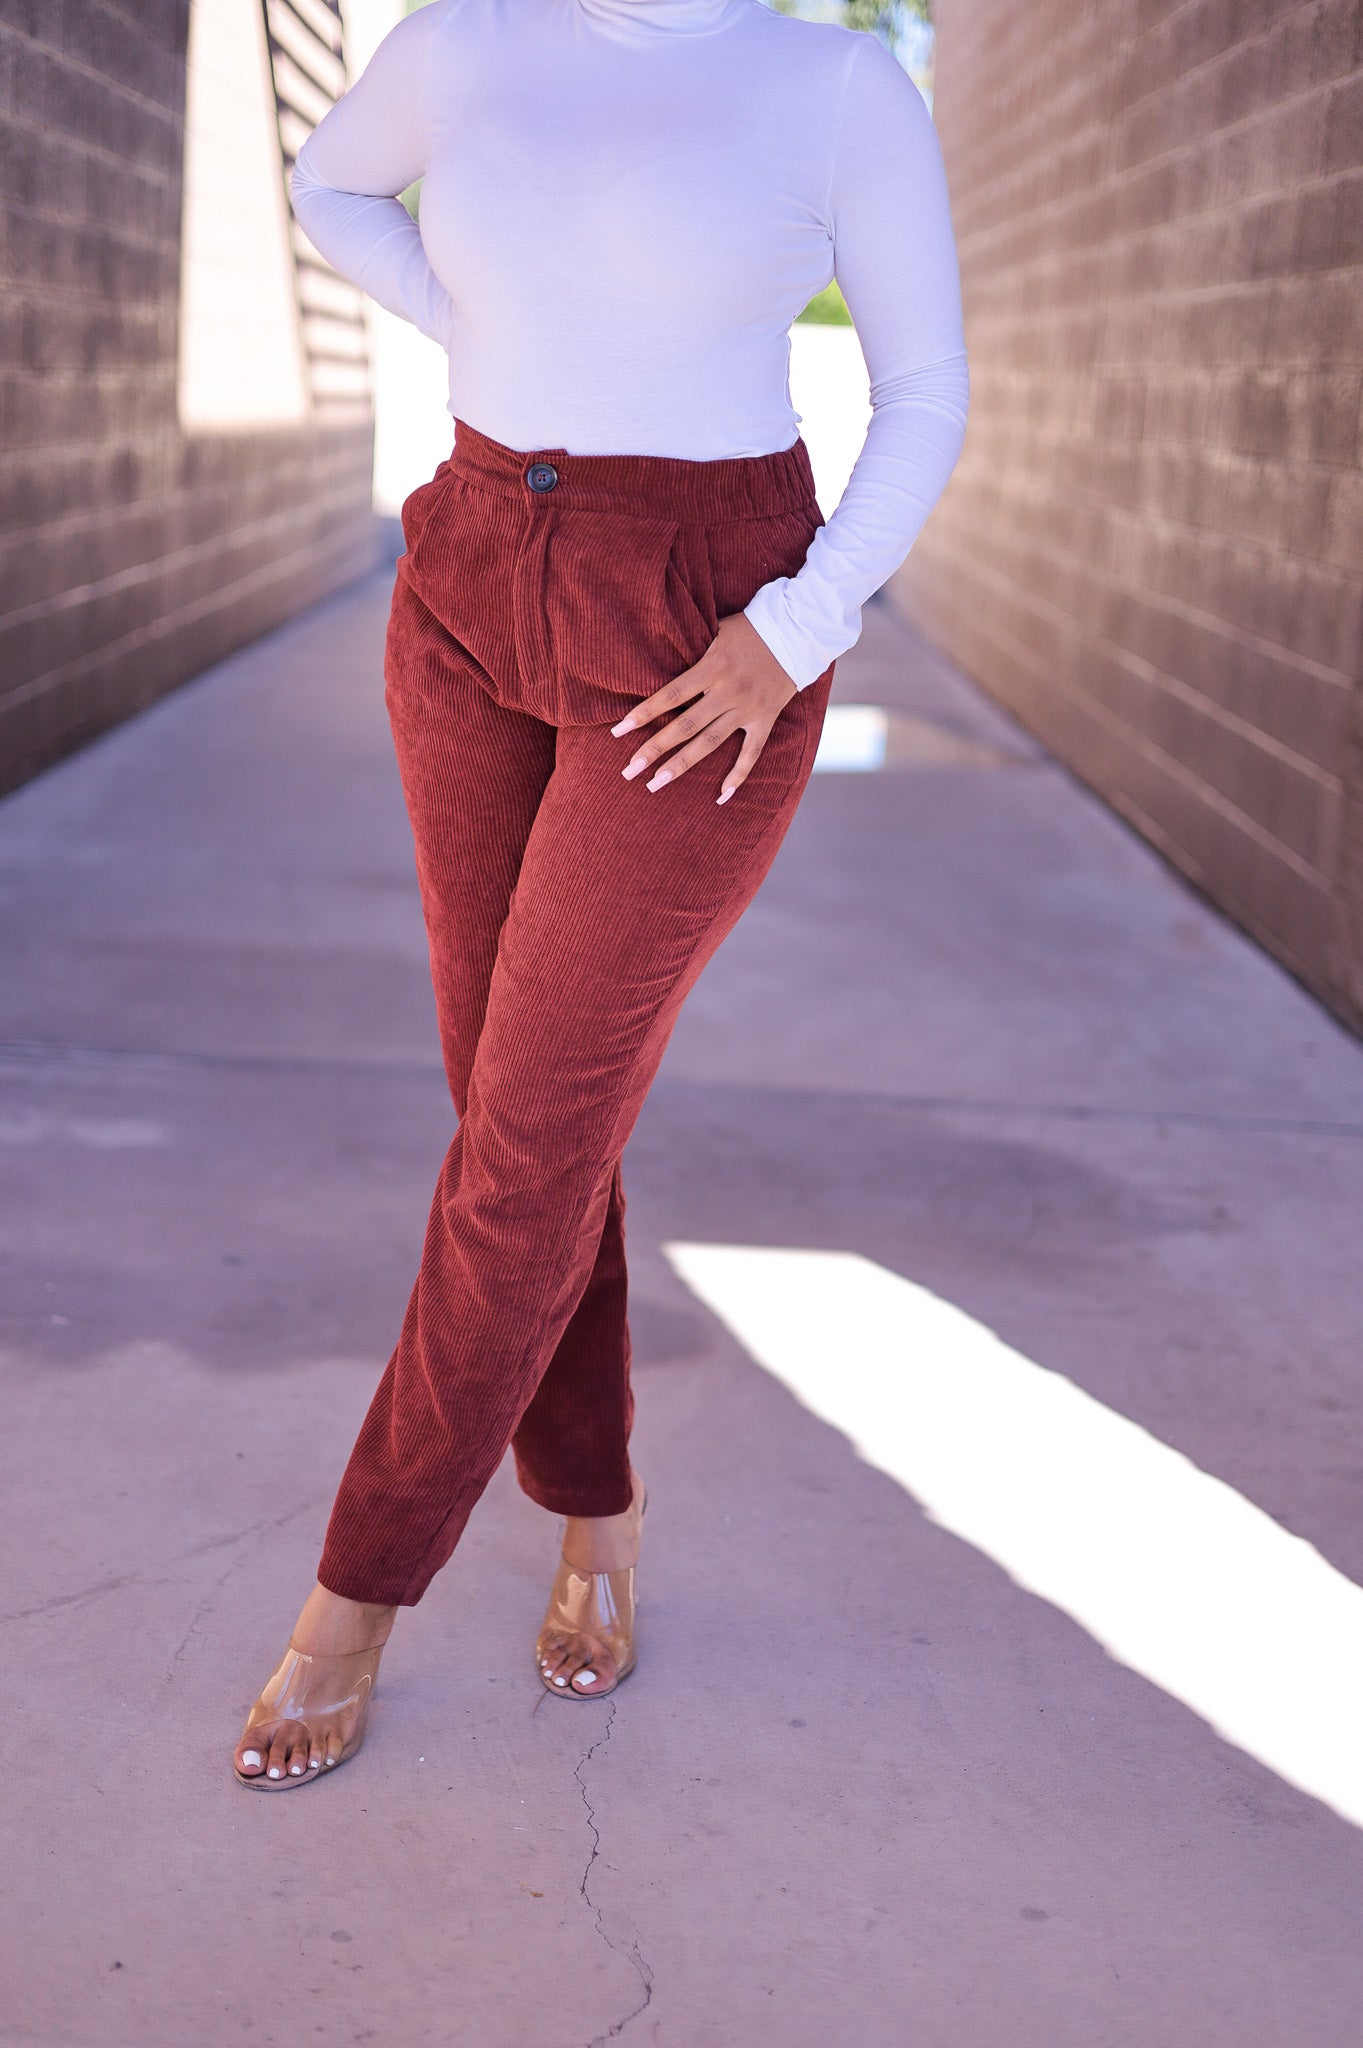 Red Corduroy Pants Outfit